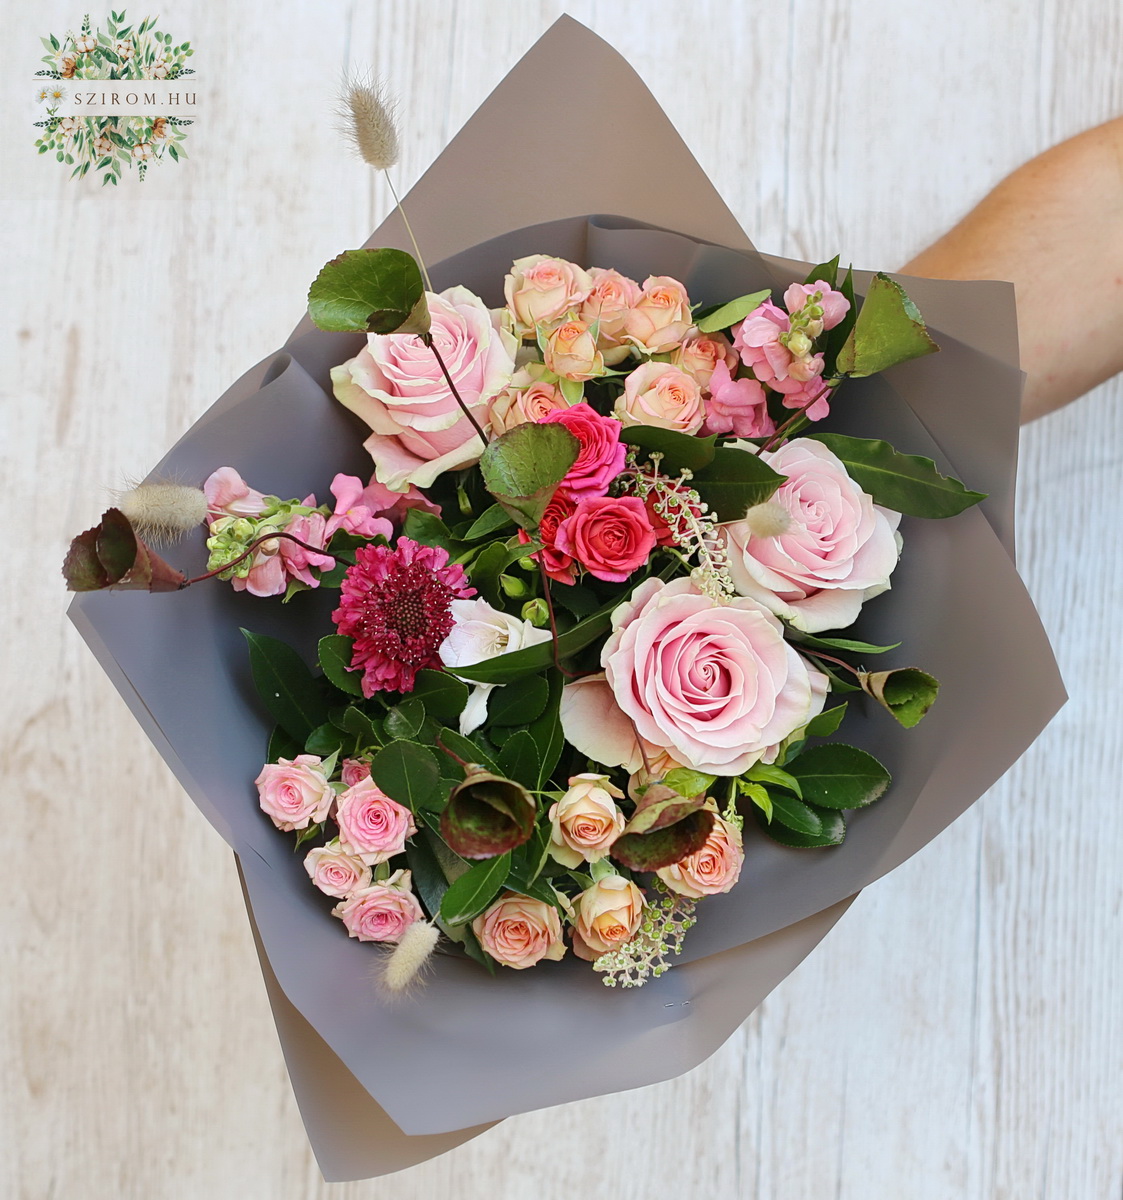 flower delivery Budapest - Romantic rose bouquet with leaf cones